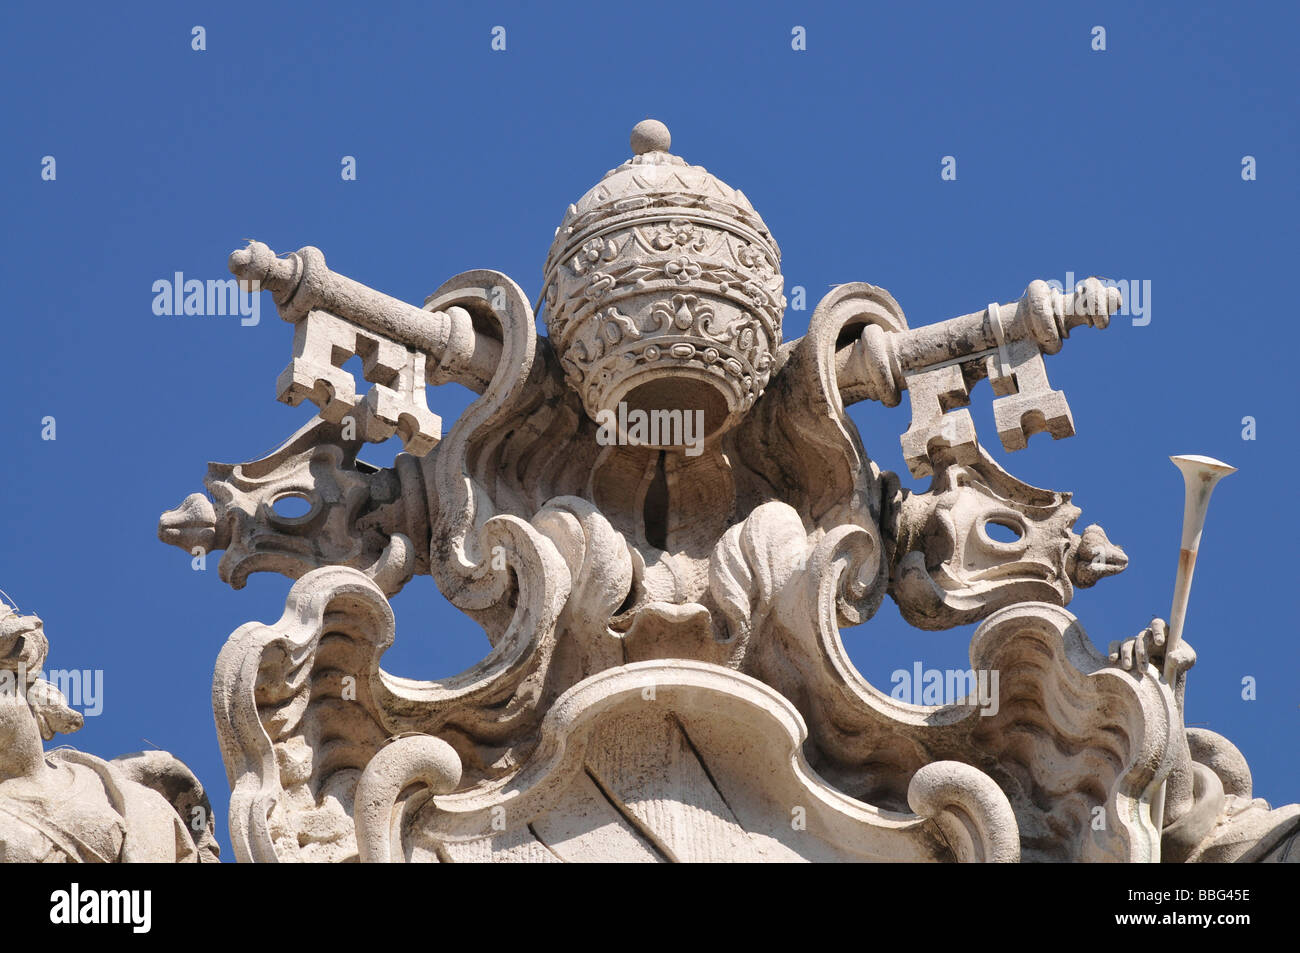 Crown with keys, detail of the Fontana di Trevi, Trevi Fountain, historic city centre, Rome, Italy, Europe Stock Photo